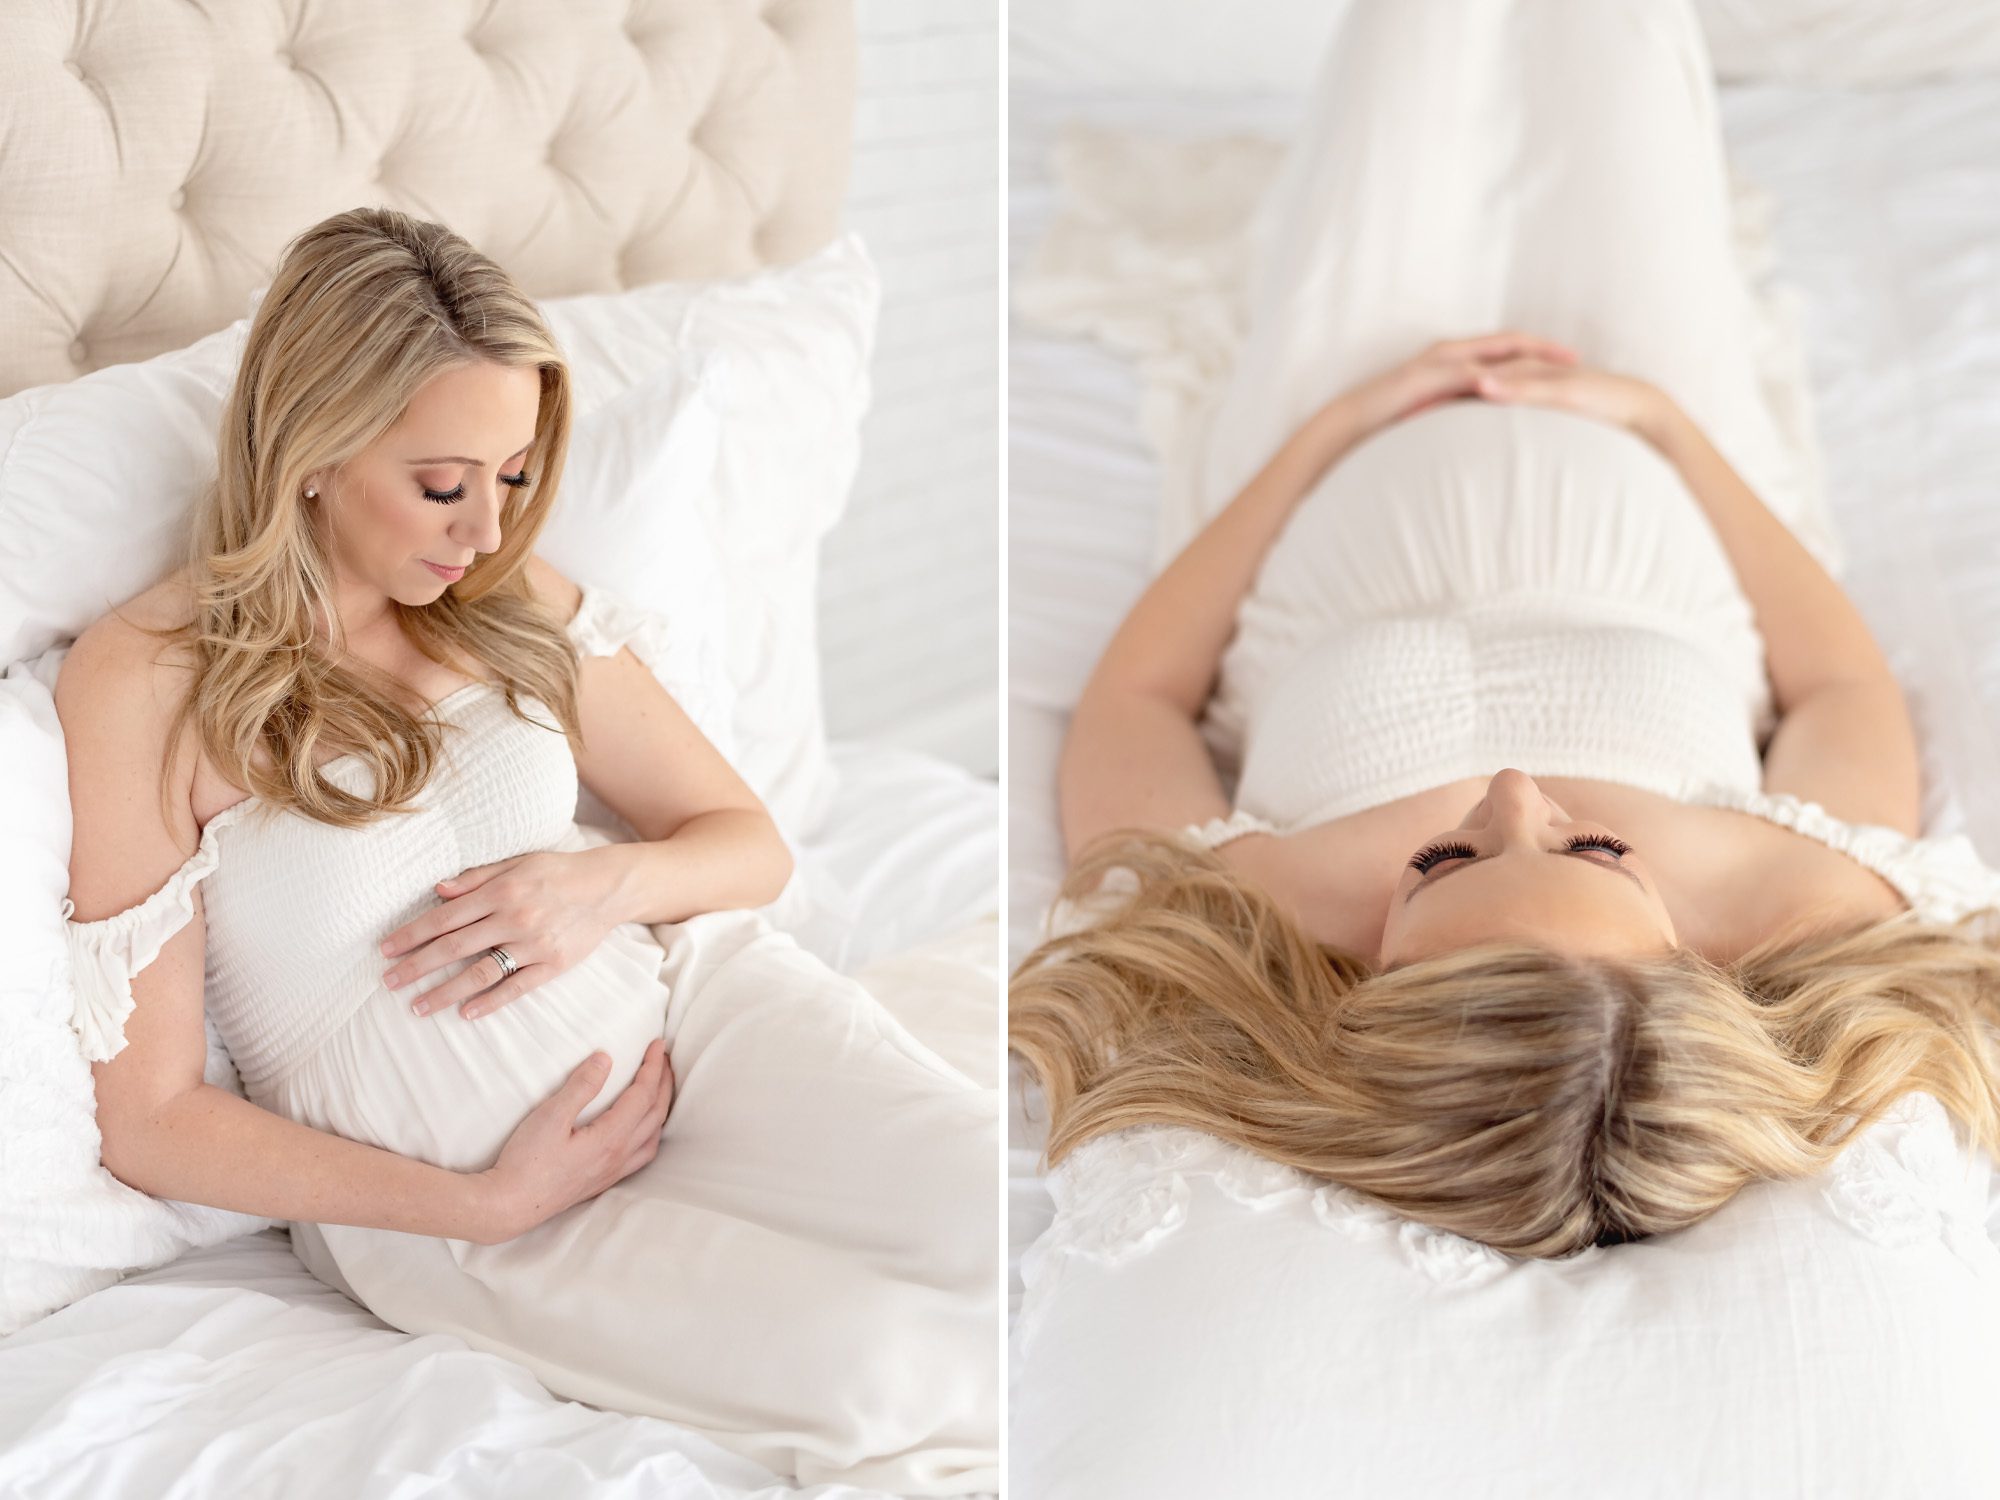 A young couple in a bright white studio getting maternity portraits done for their first child.